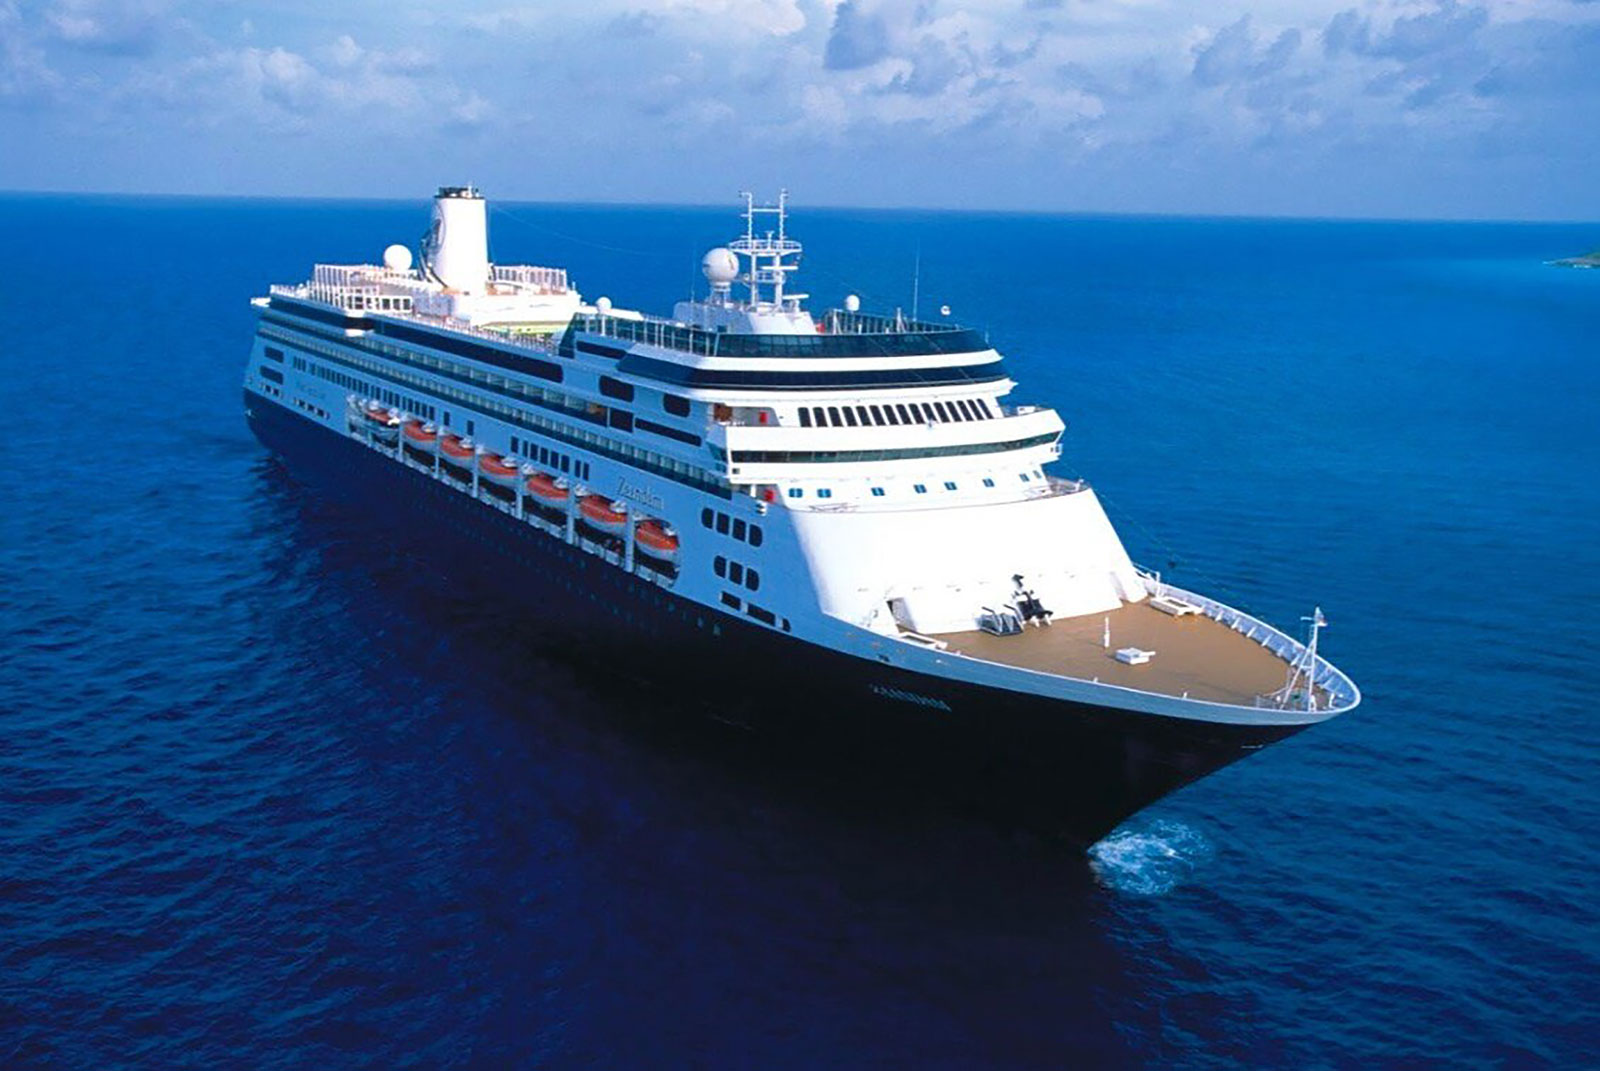 42 people – 13 guests and 29 crew -- aboard Holland America’s “Zaandam” ship have reported experiencing flu-like symptoms, according to a release on the cruise line’s website.